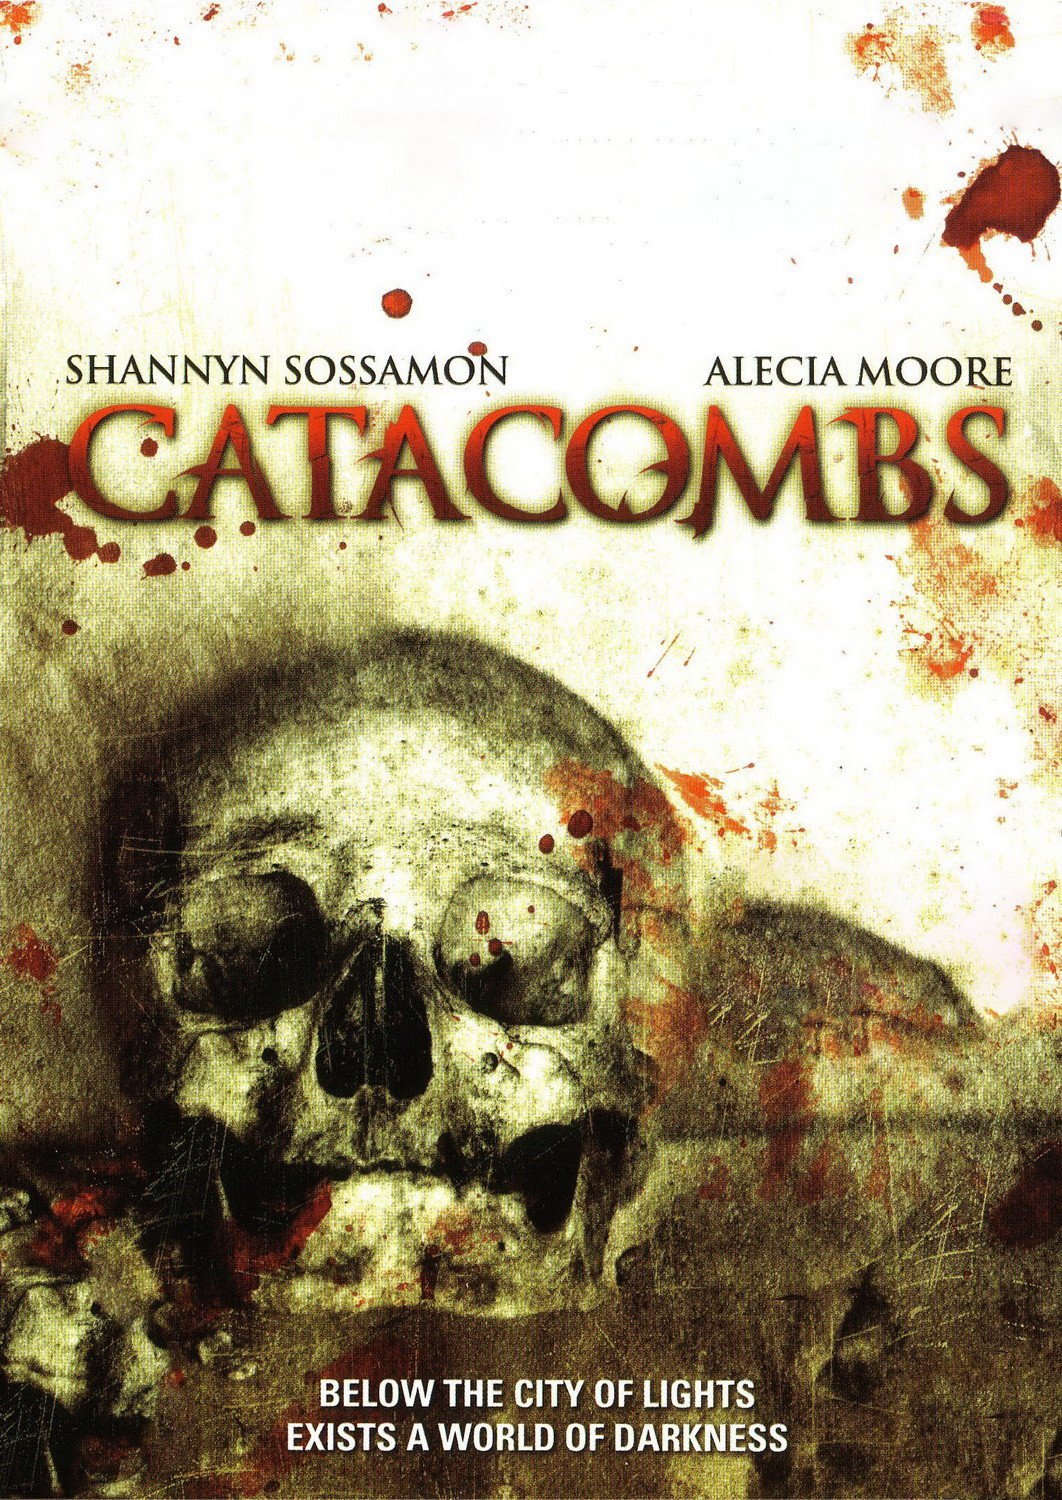 Poster for the movie "Catacombs"